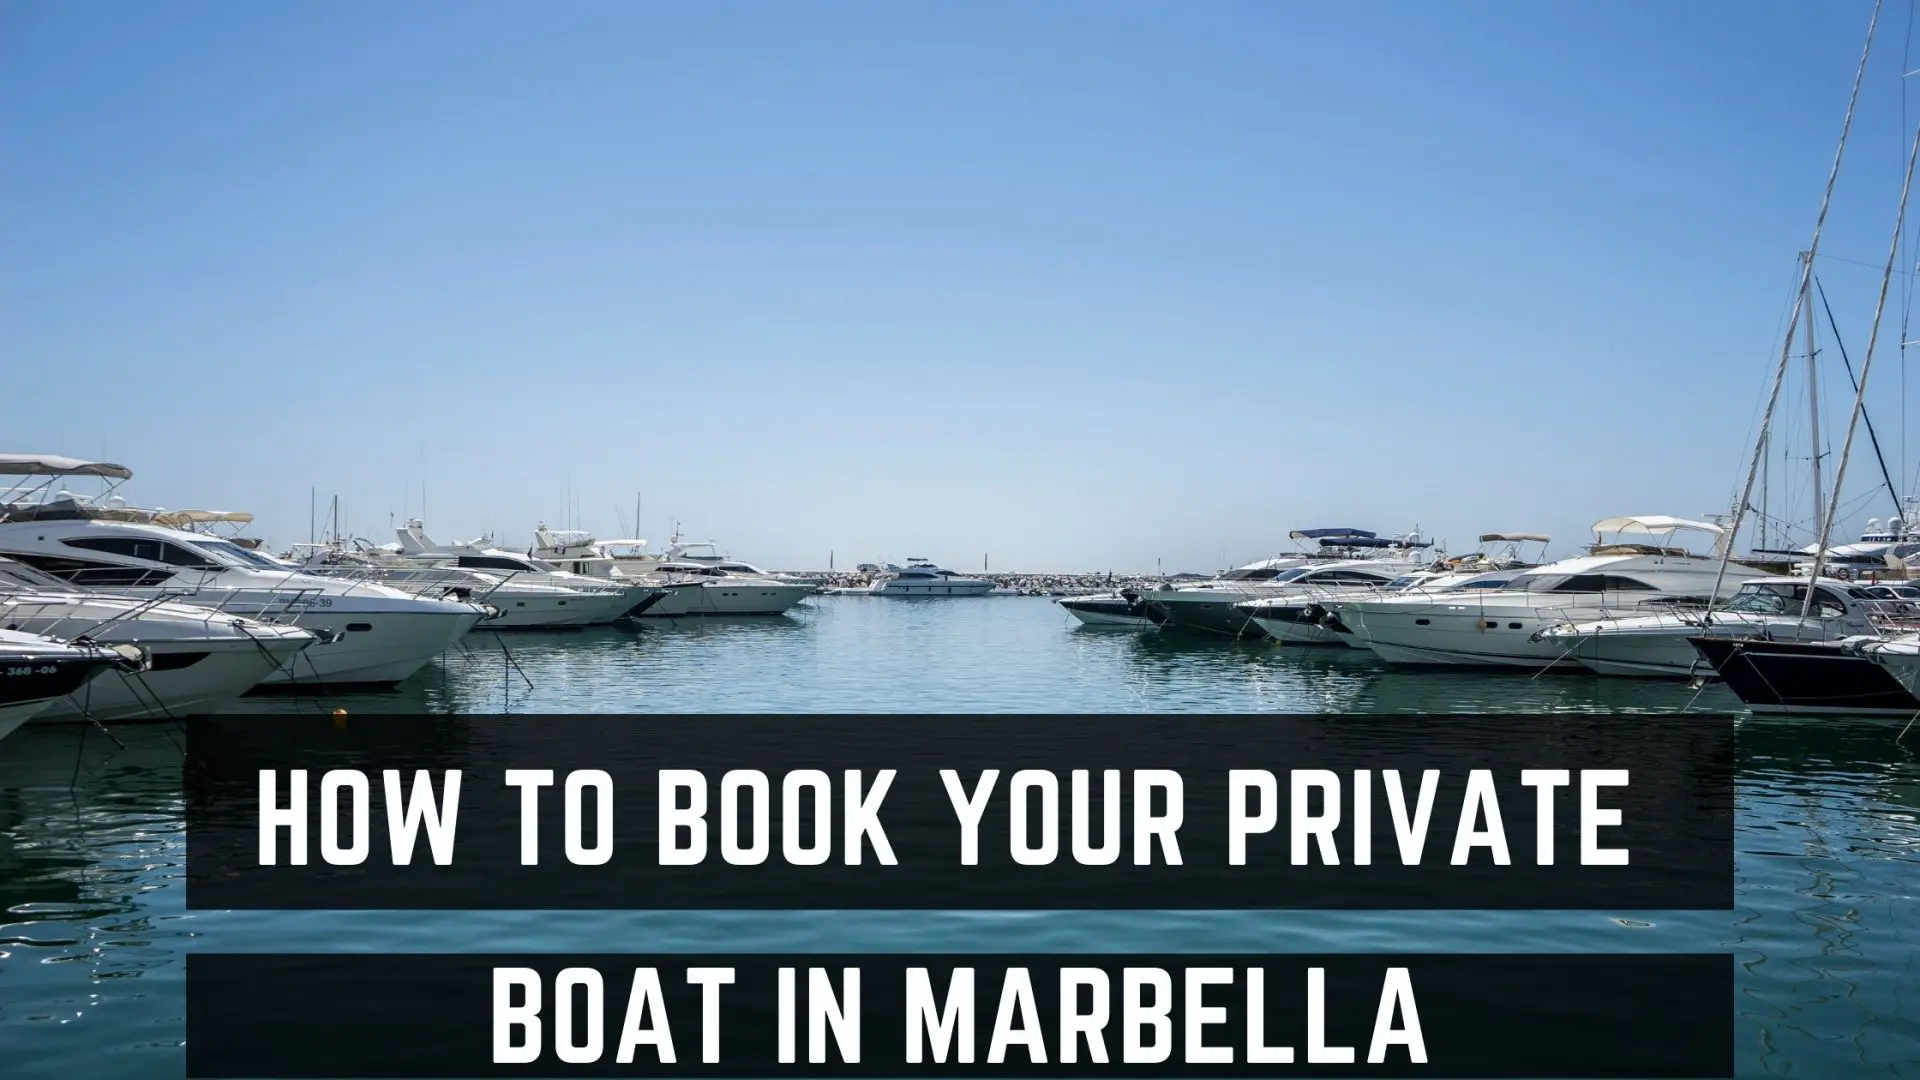 How To Book Your Private Boat In Marbella